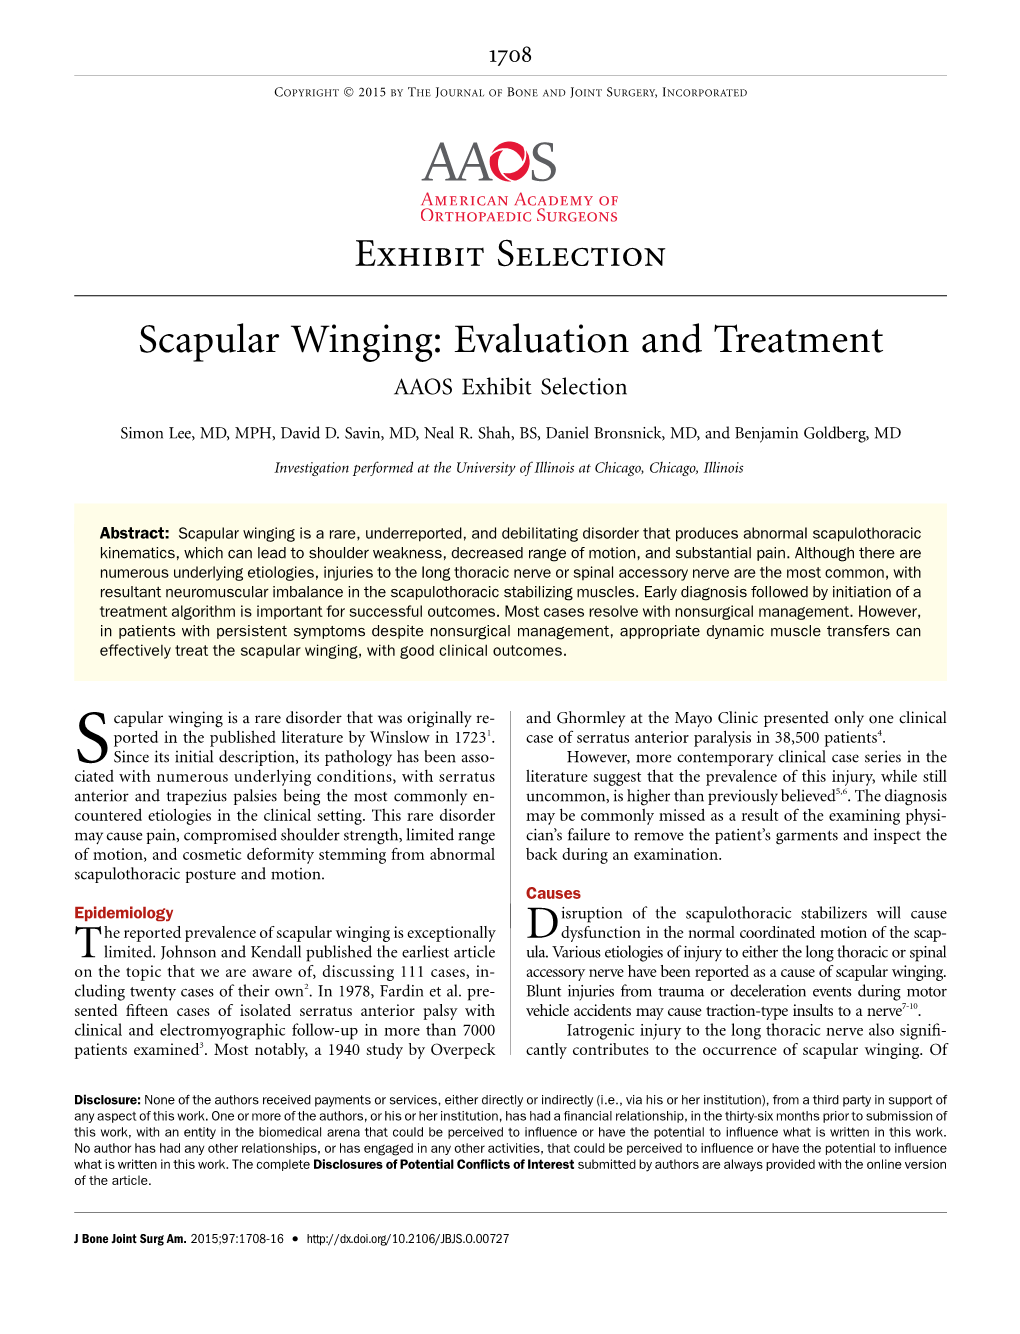 Scapular Winging: Evaluation and Treatment AAOS Exhibit Selection